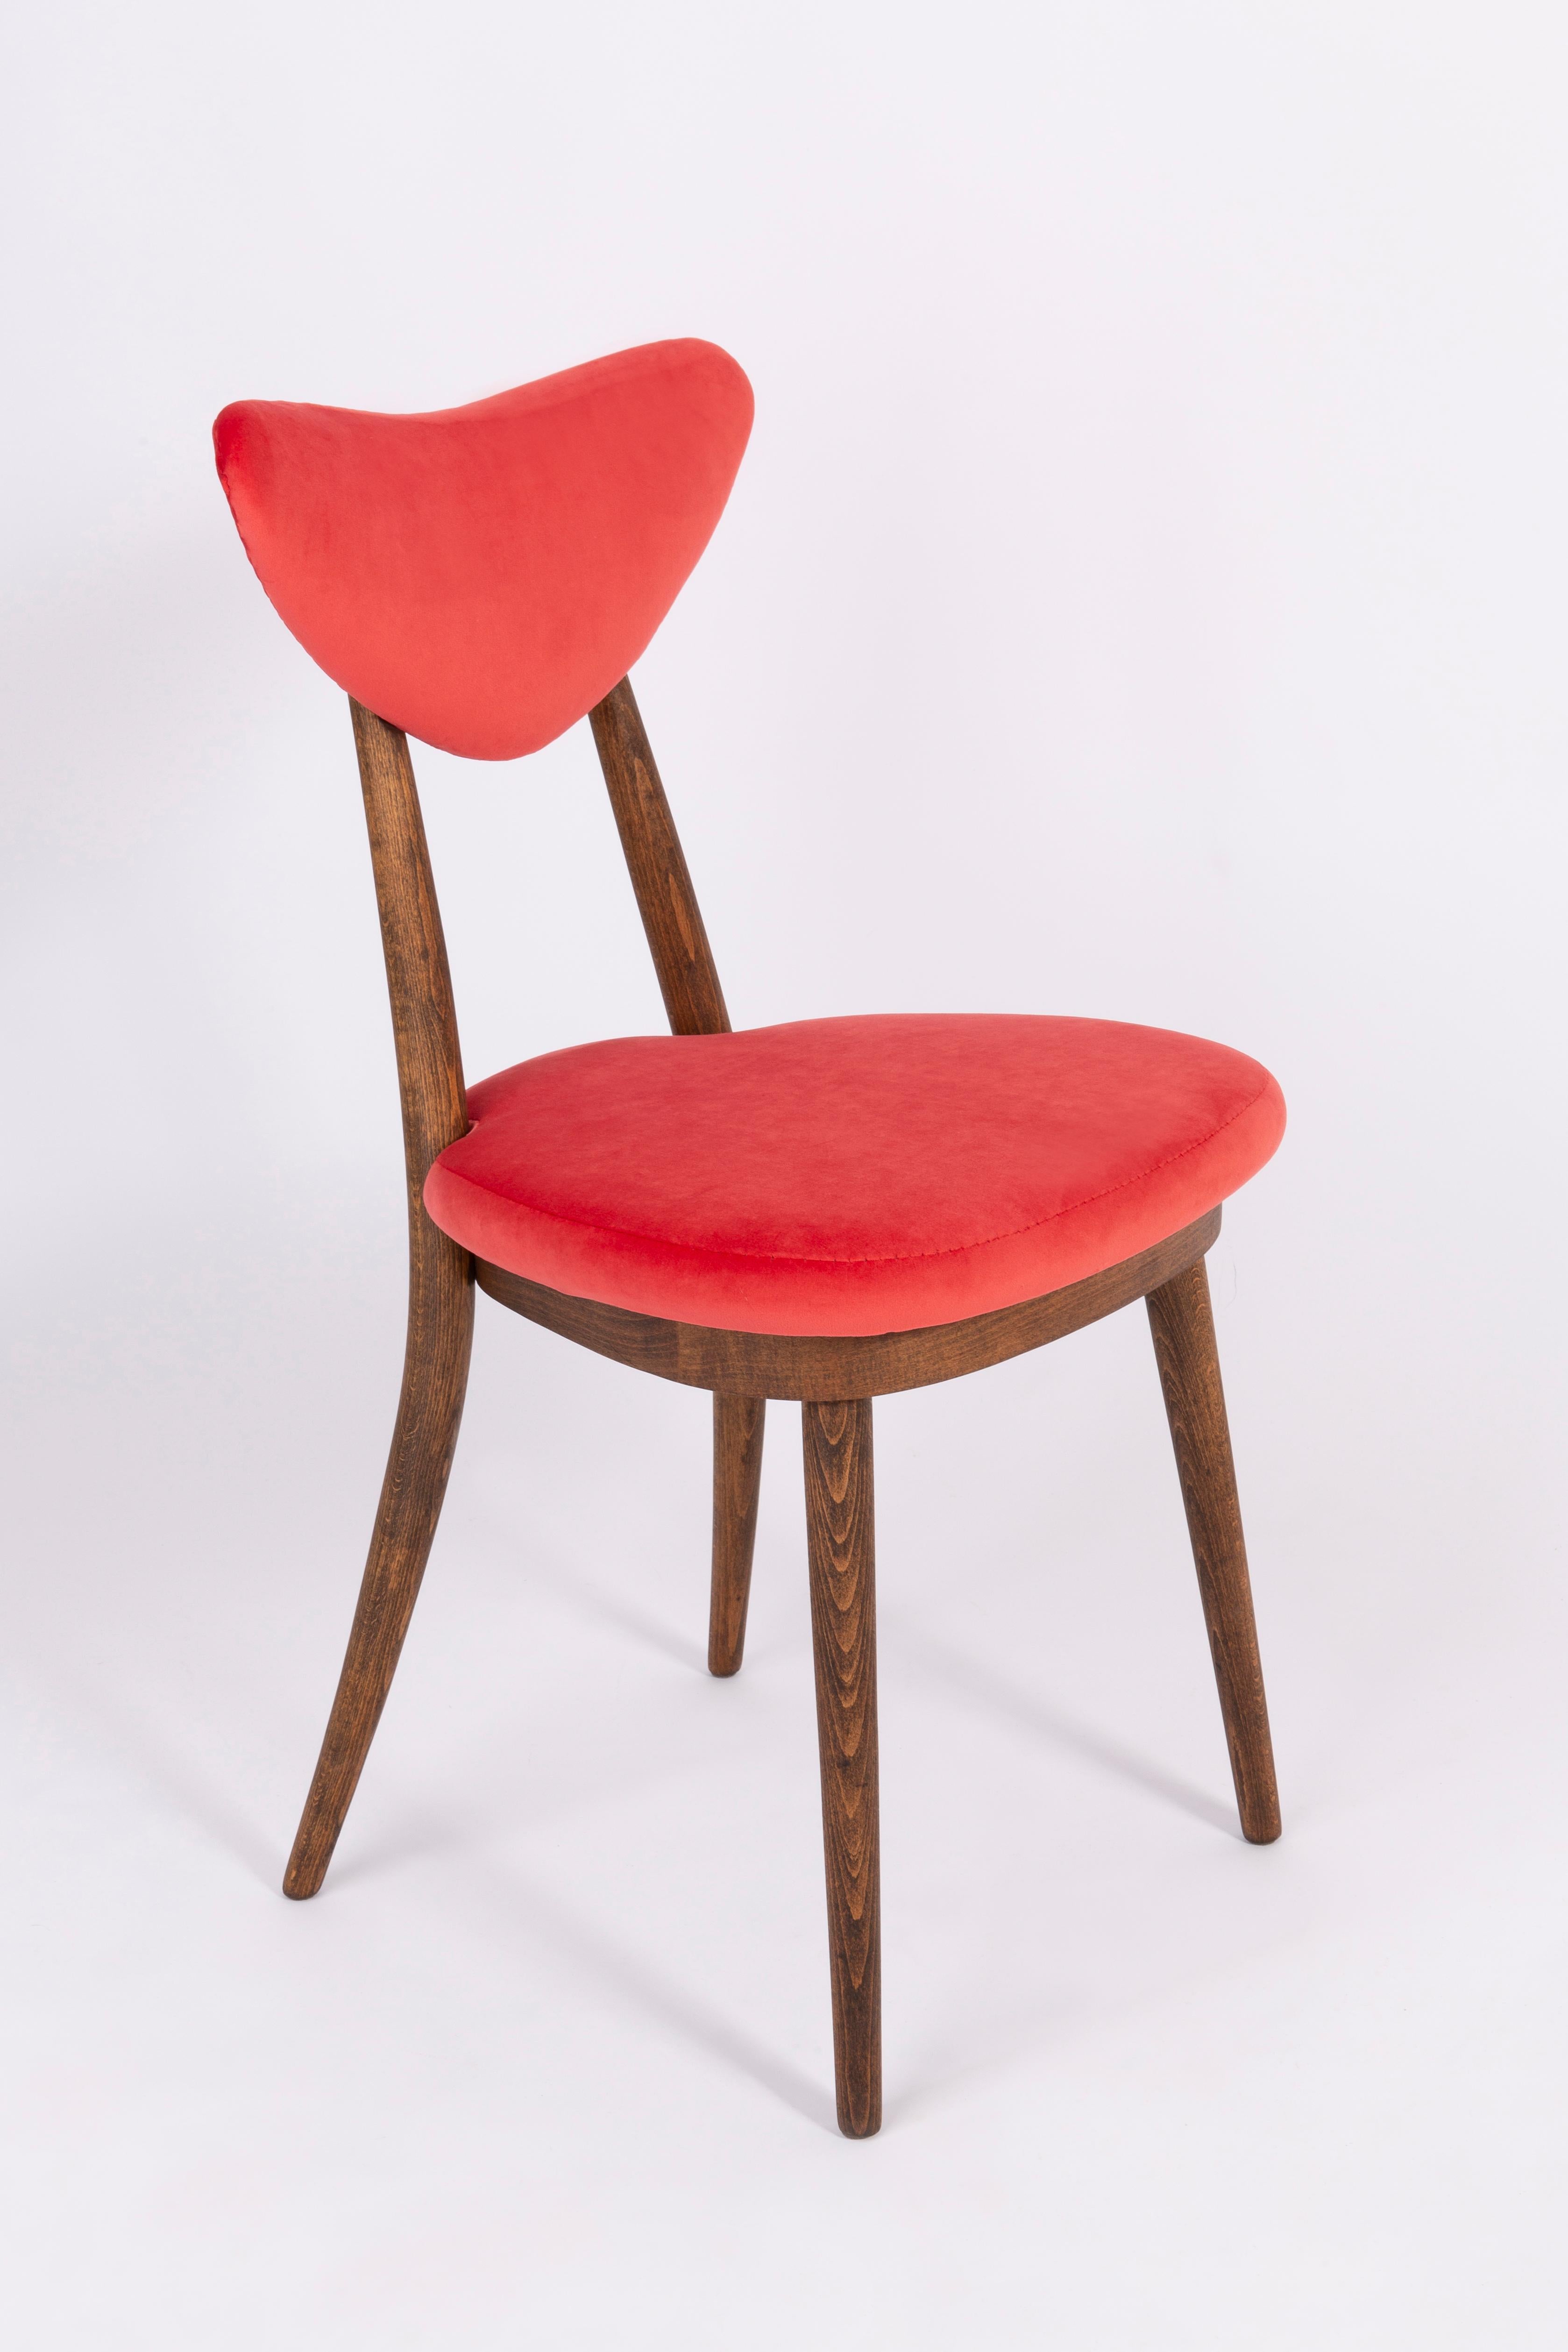 Set of Two Red Heart Chairs, Poland, 1960s For Sale 4